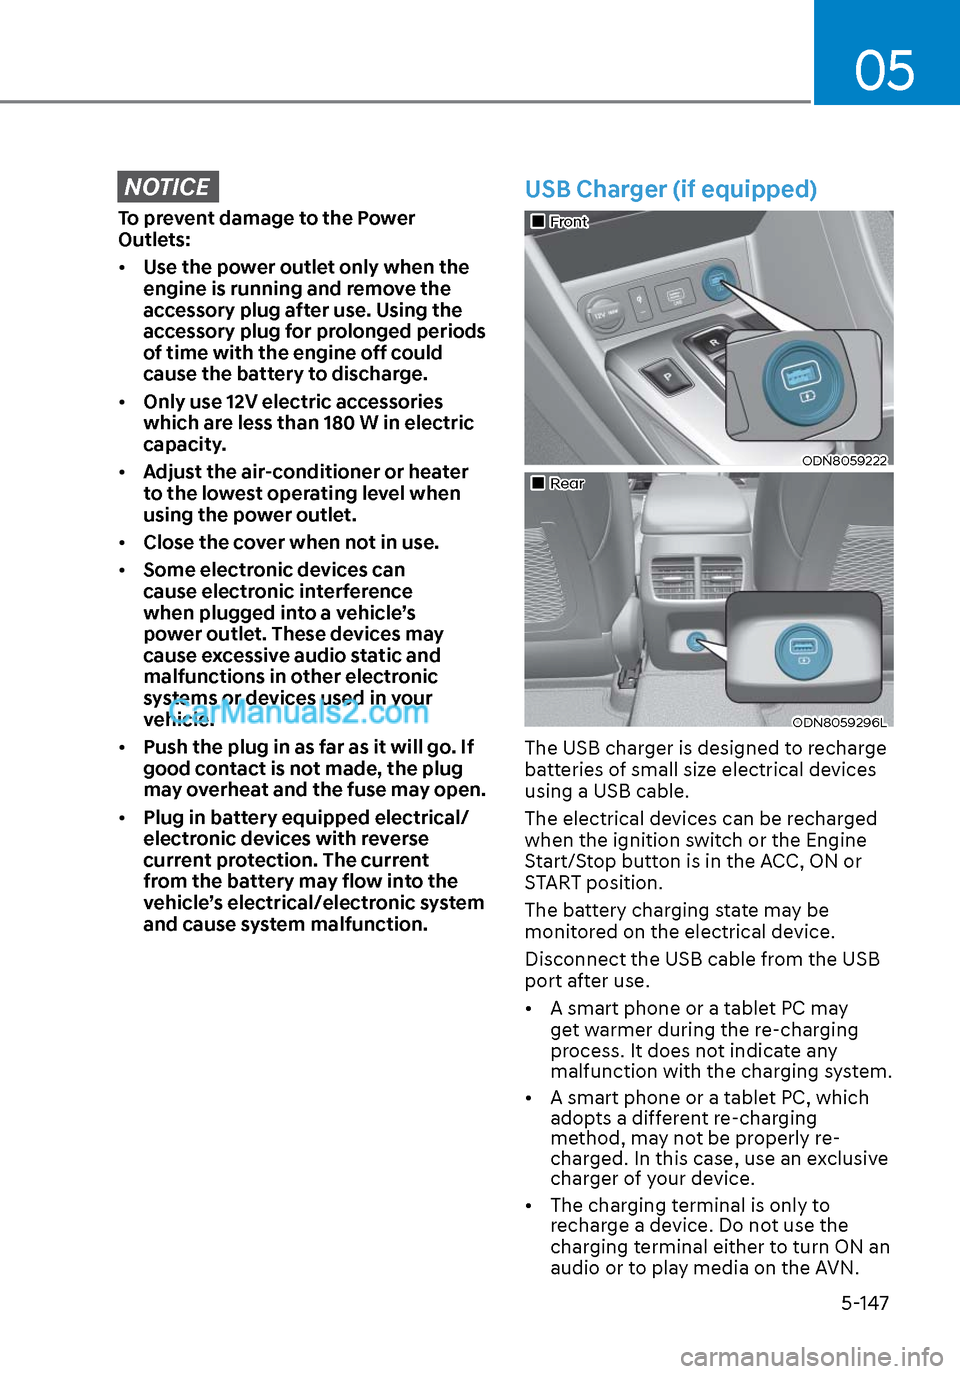 Hyundai Sonata 2020 Owners Guide 05
5-147
NOTICE
To prevent damage to the Power 
Outlets:
• Use the power outlet only when the 
engine is running and remove the 
accessory plug after use. Using the 
accessory plug for prolonged per